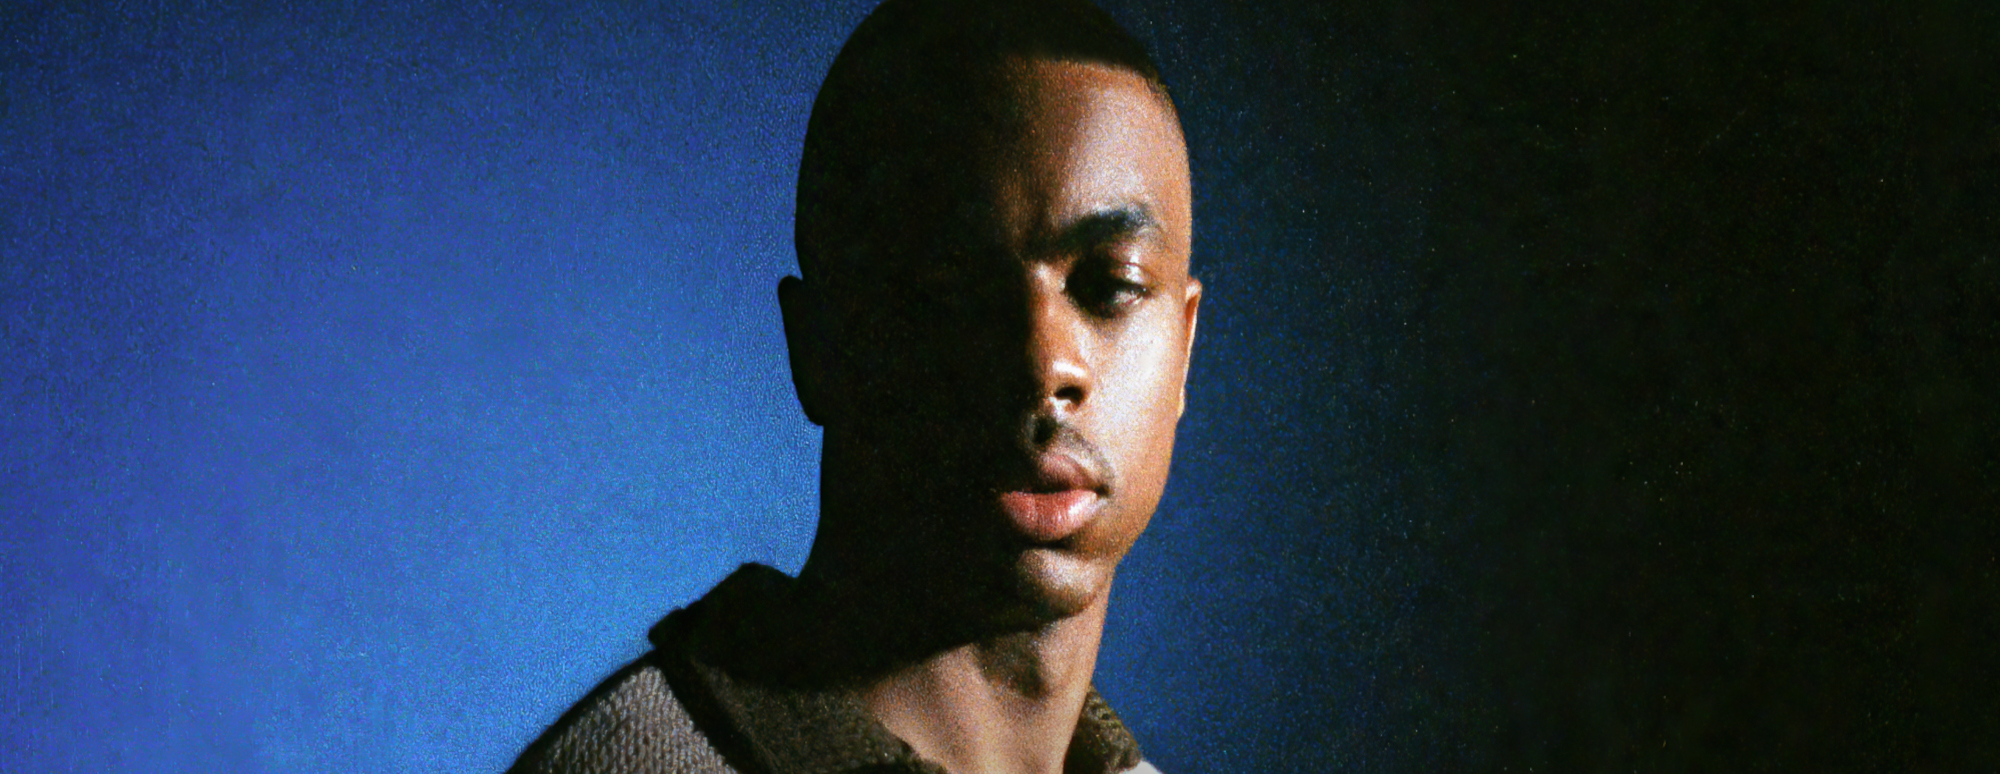 Vince Staples’ Self-Titled Album Is His First Release in Three Years